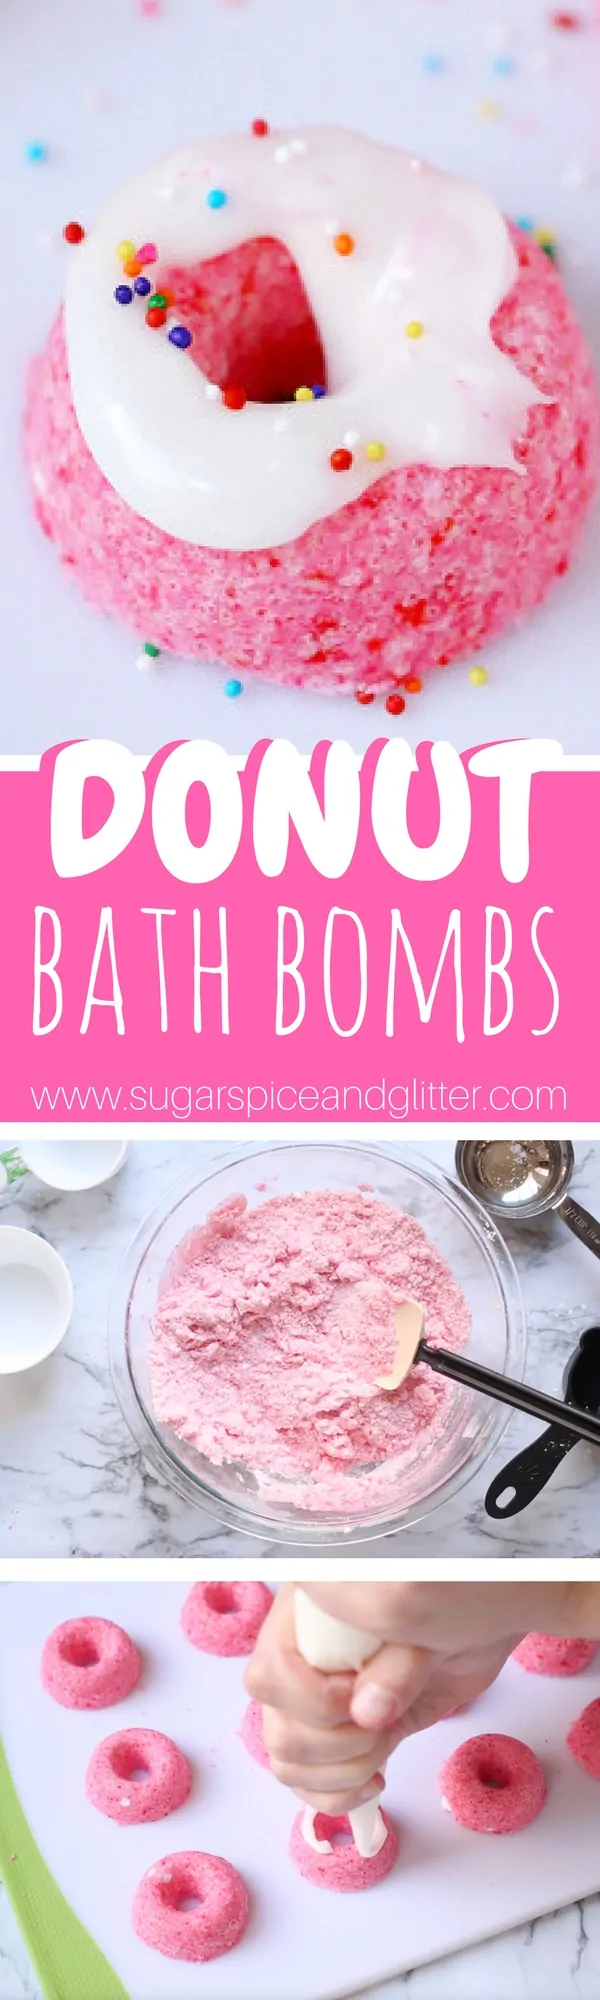 Delicious-smelling DIY Bath Bombs for a homemade gift idea with a bit of whimsy. A perfect homemade birthday gift or non-edible Valentine